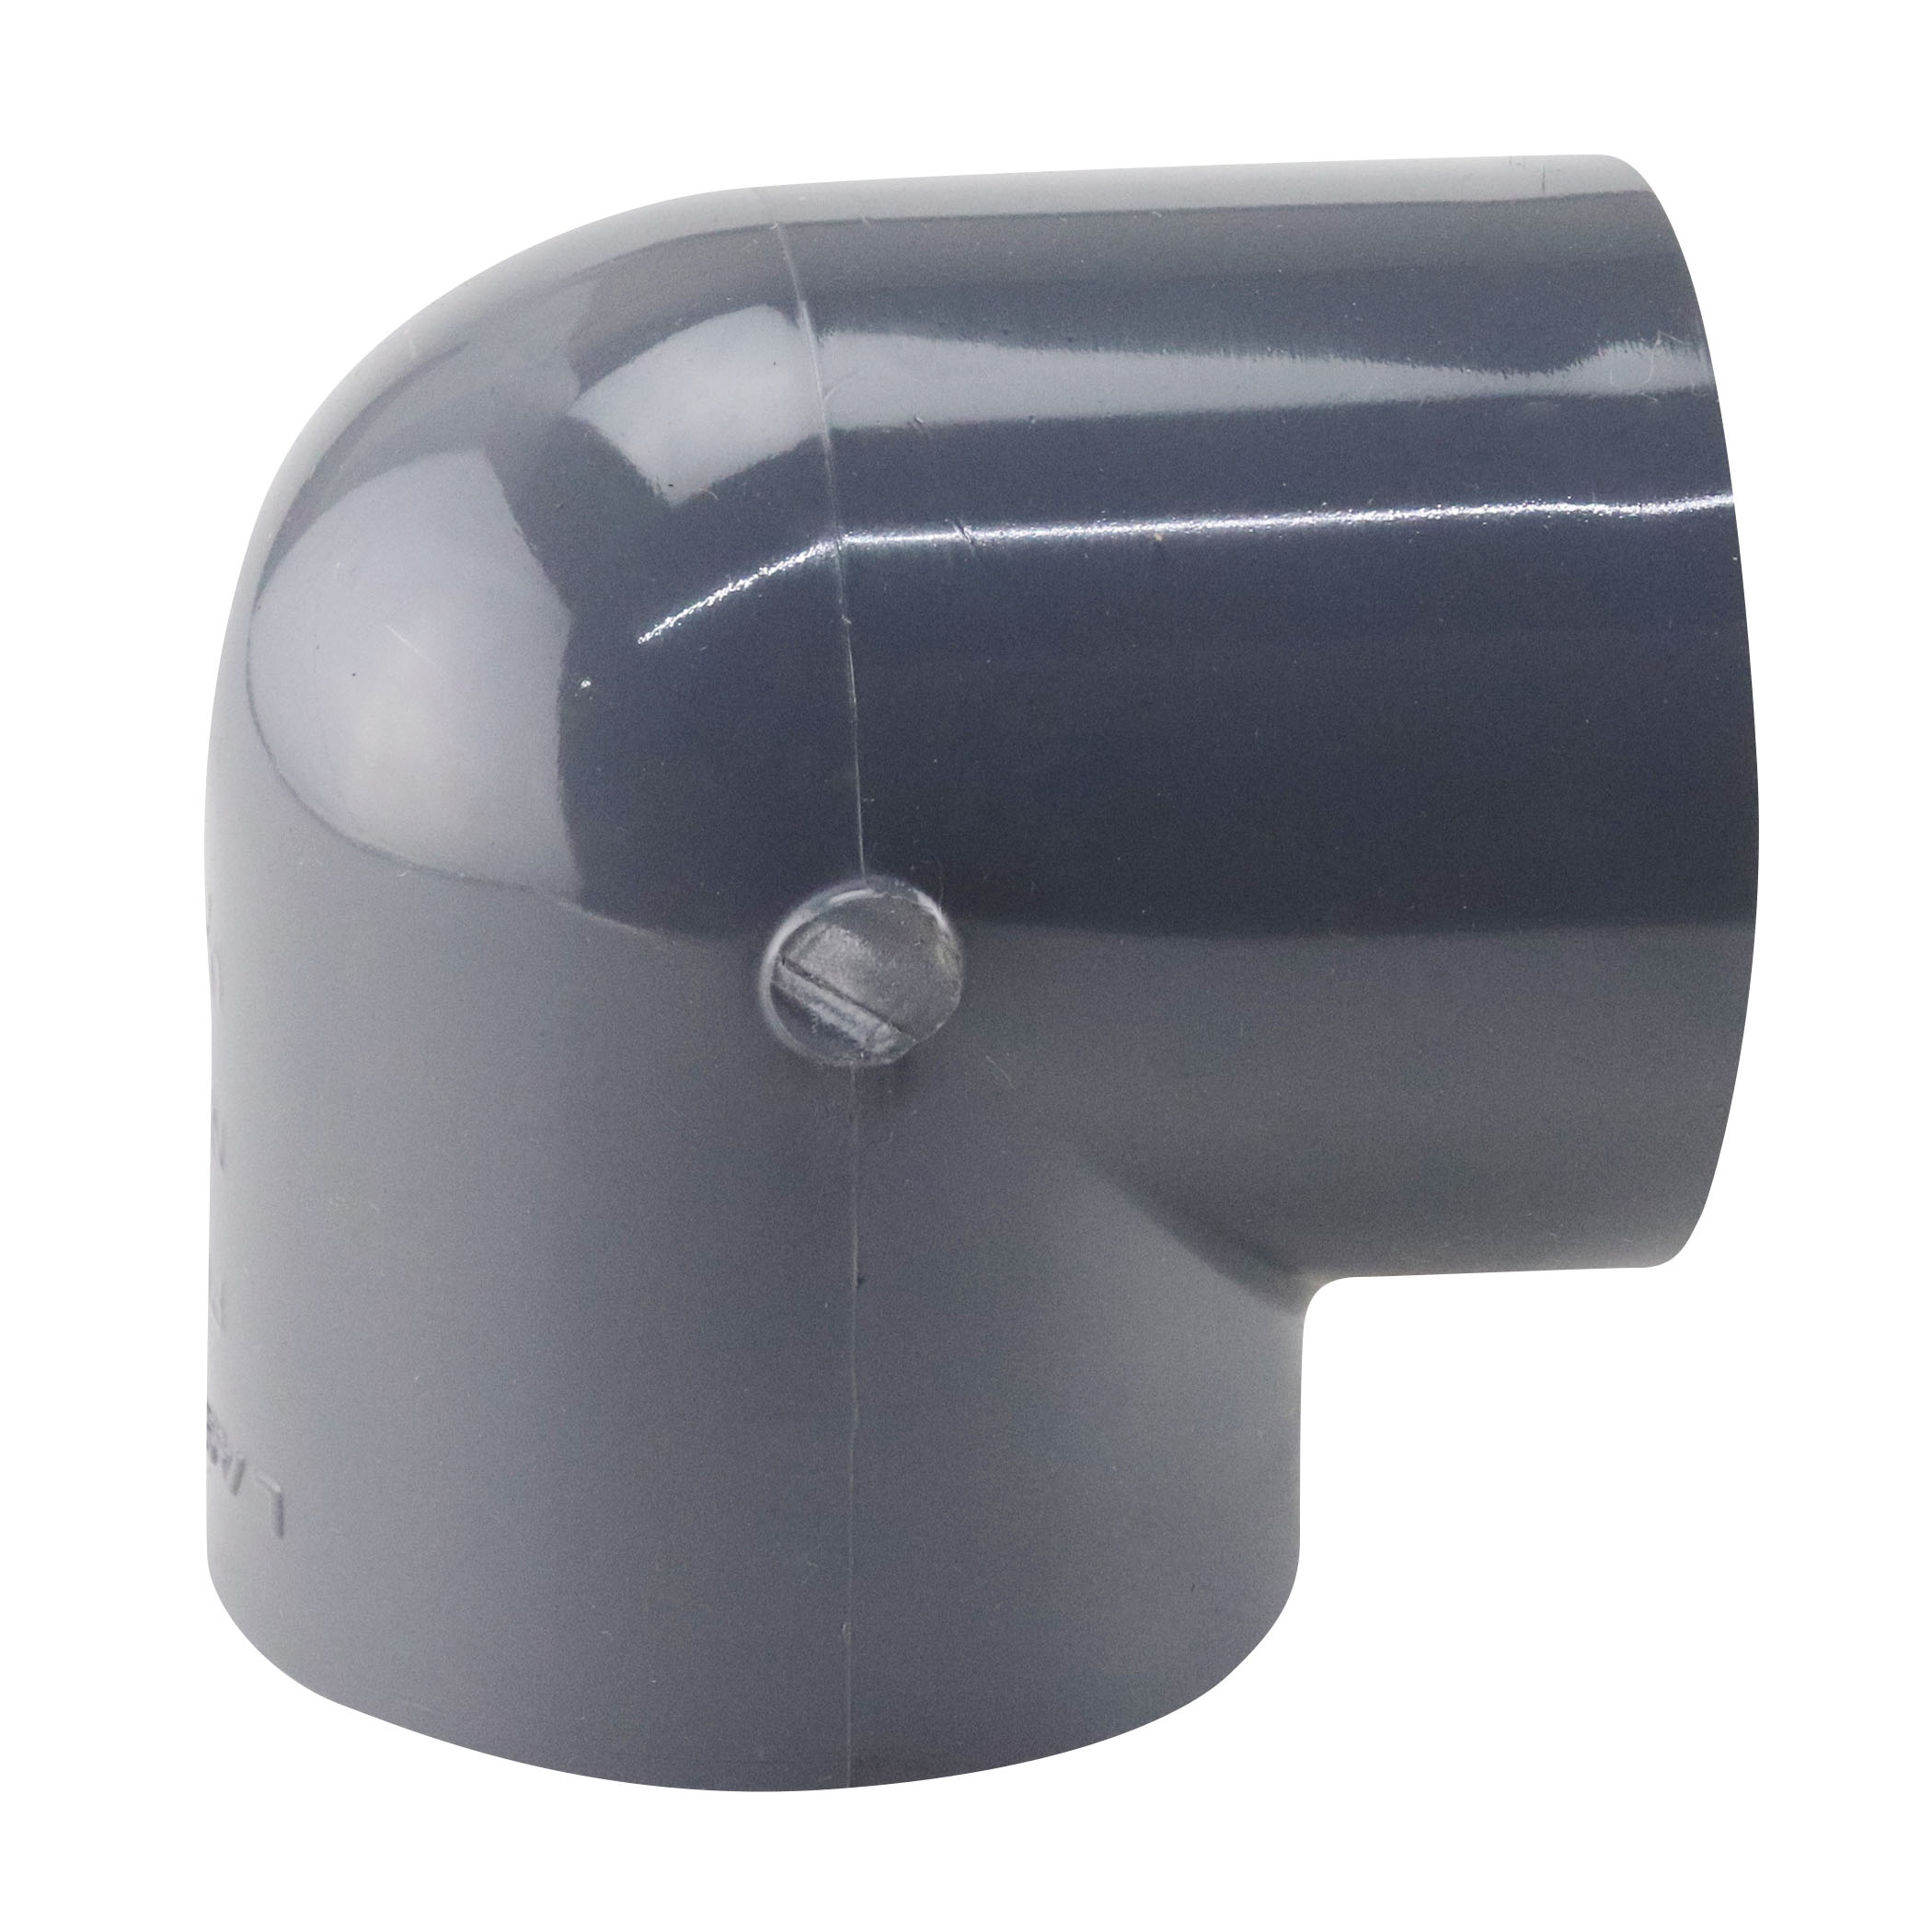 808015BC Pipe Elbow, 1-1/2 in, Female, 90 deg Angle, PVC, SCH 80 Schedule